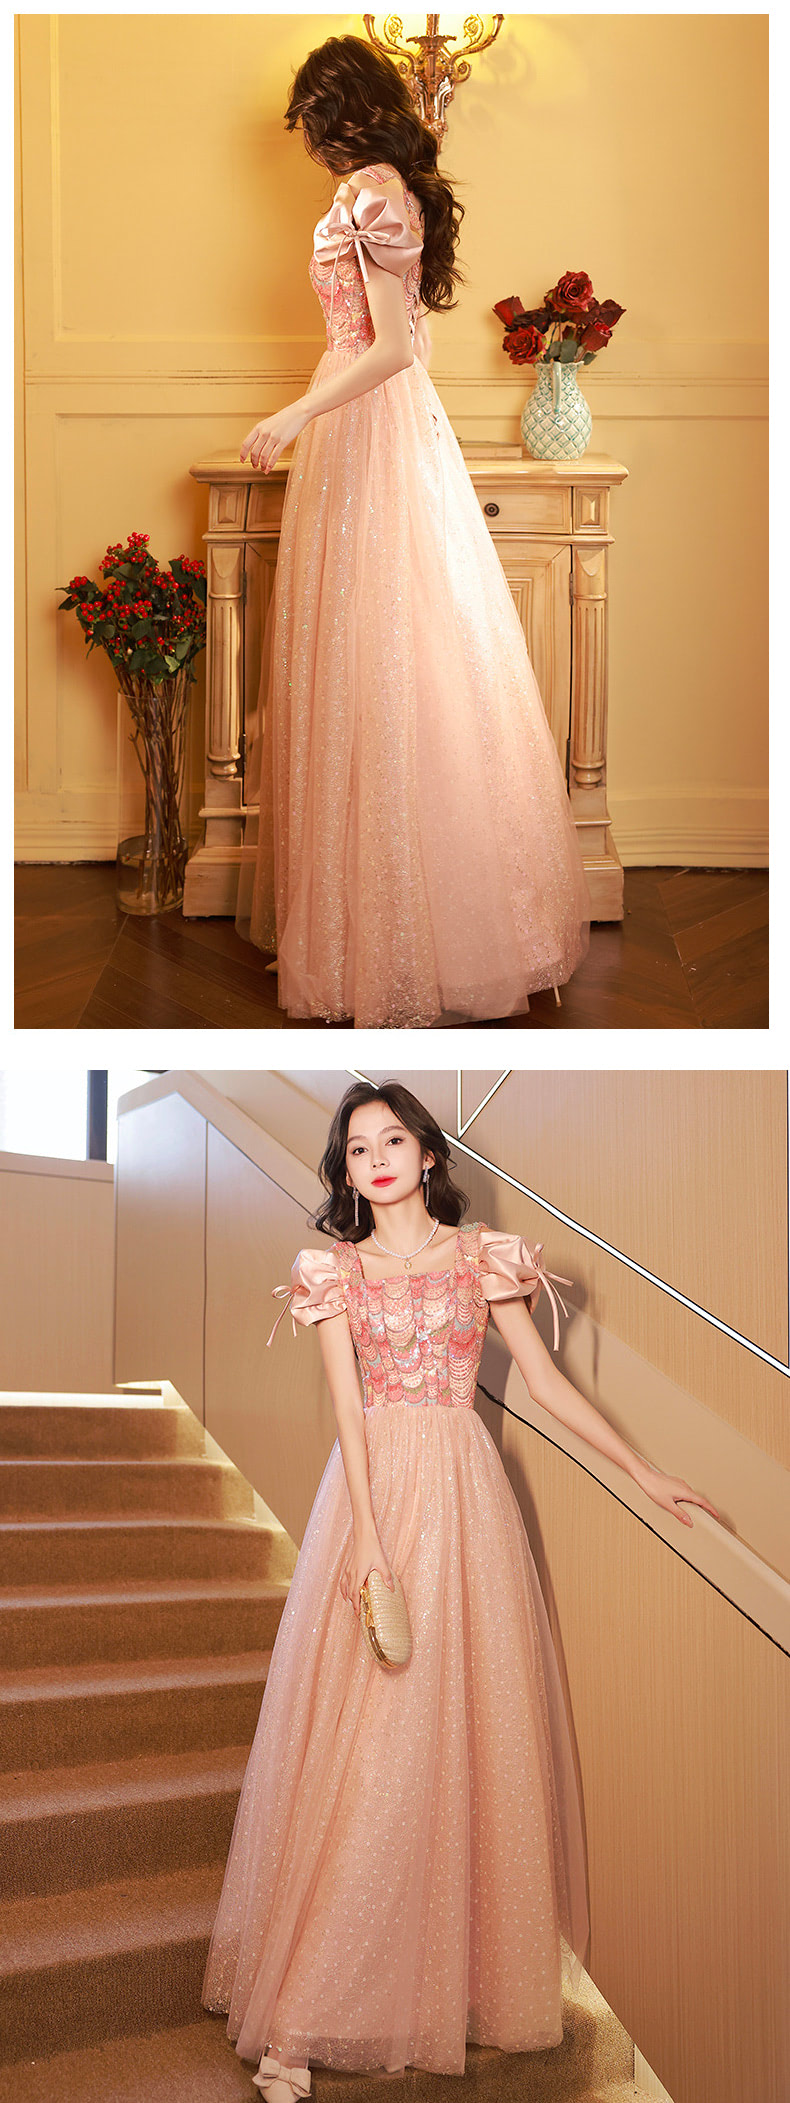 Beautiful-Romantic-Princess-Pink-Cocktail-Party-Dress-Formal-Gown12.jpg